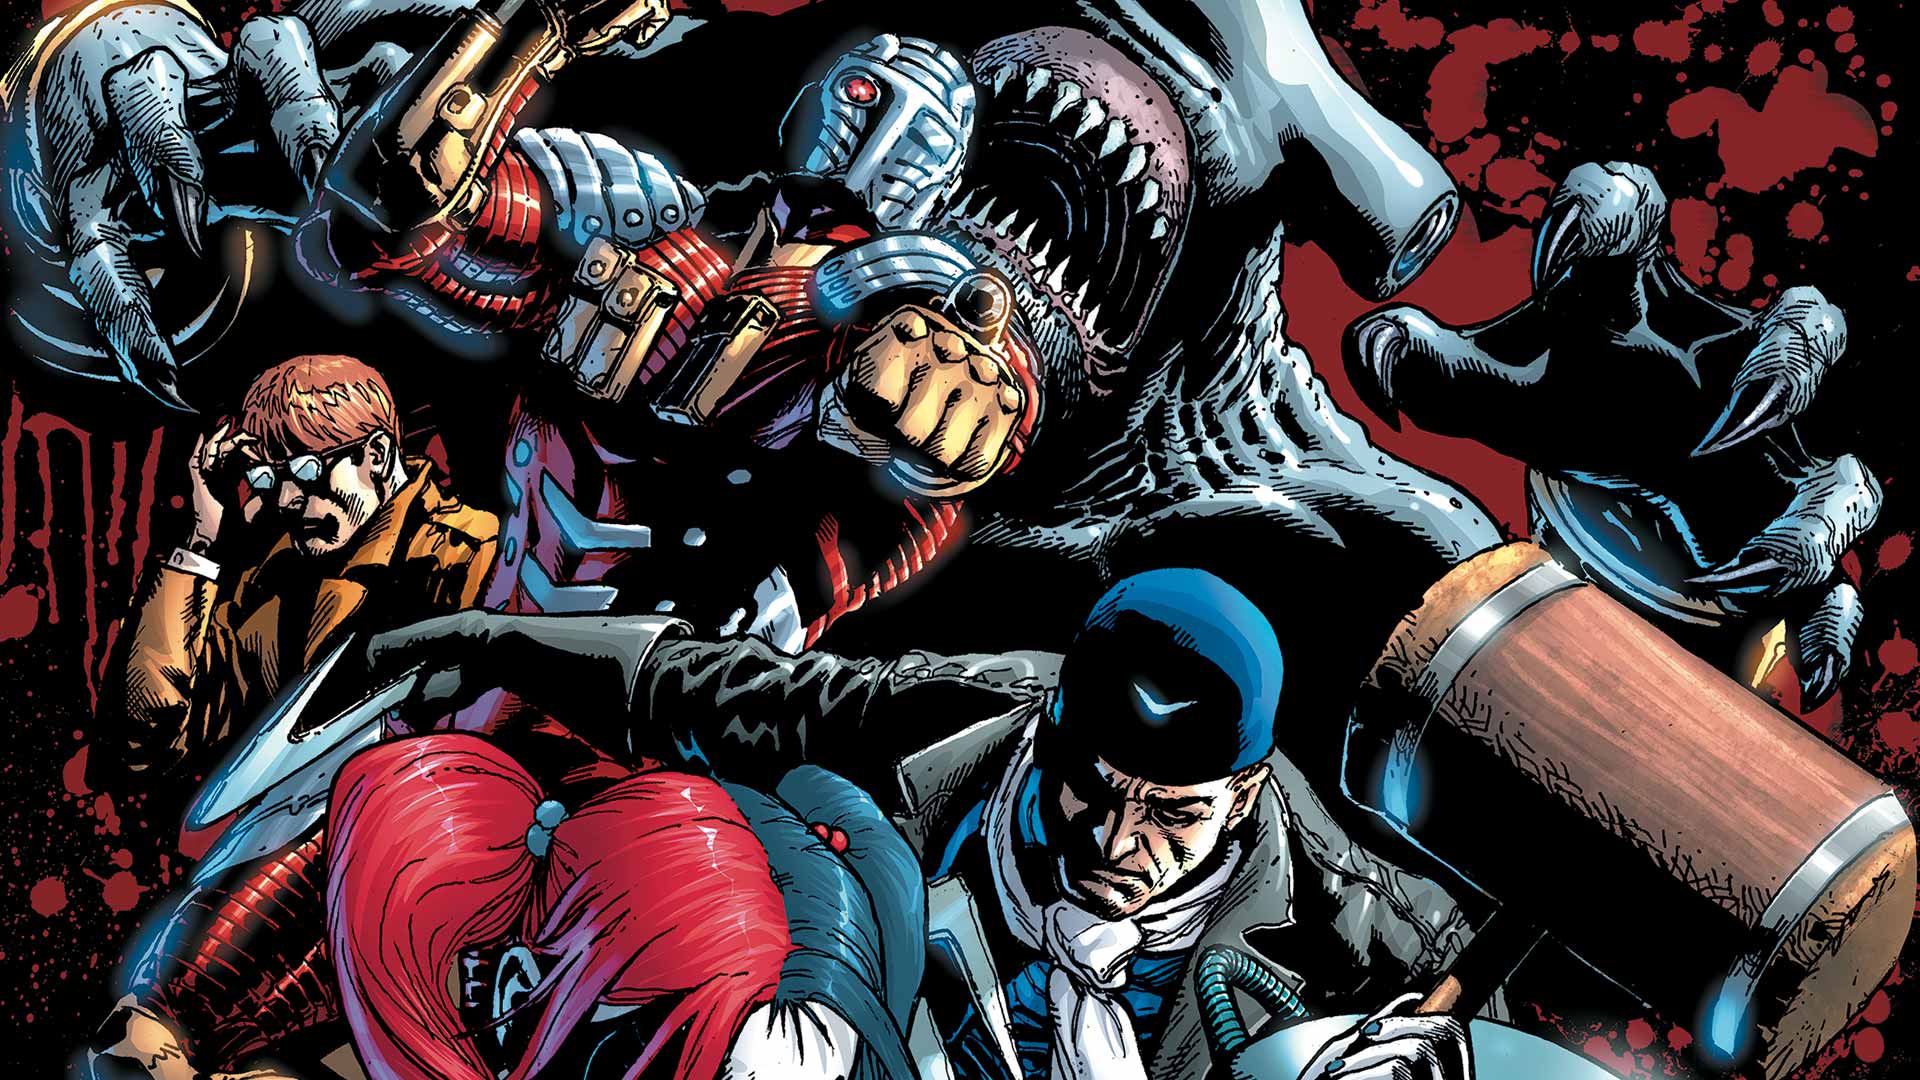 Suicide Squad Kicked In The Teeth Review as part of Graphic Novel Talk